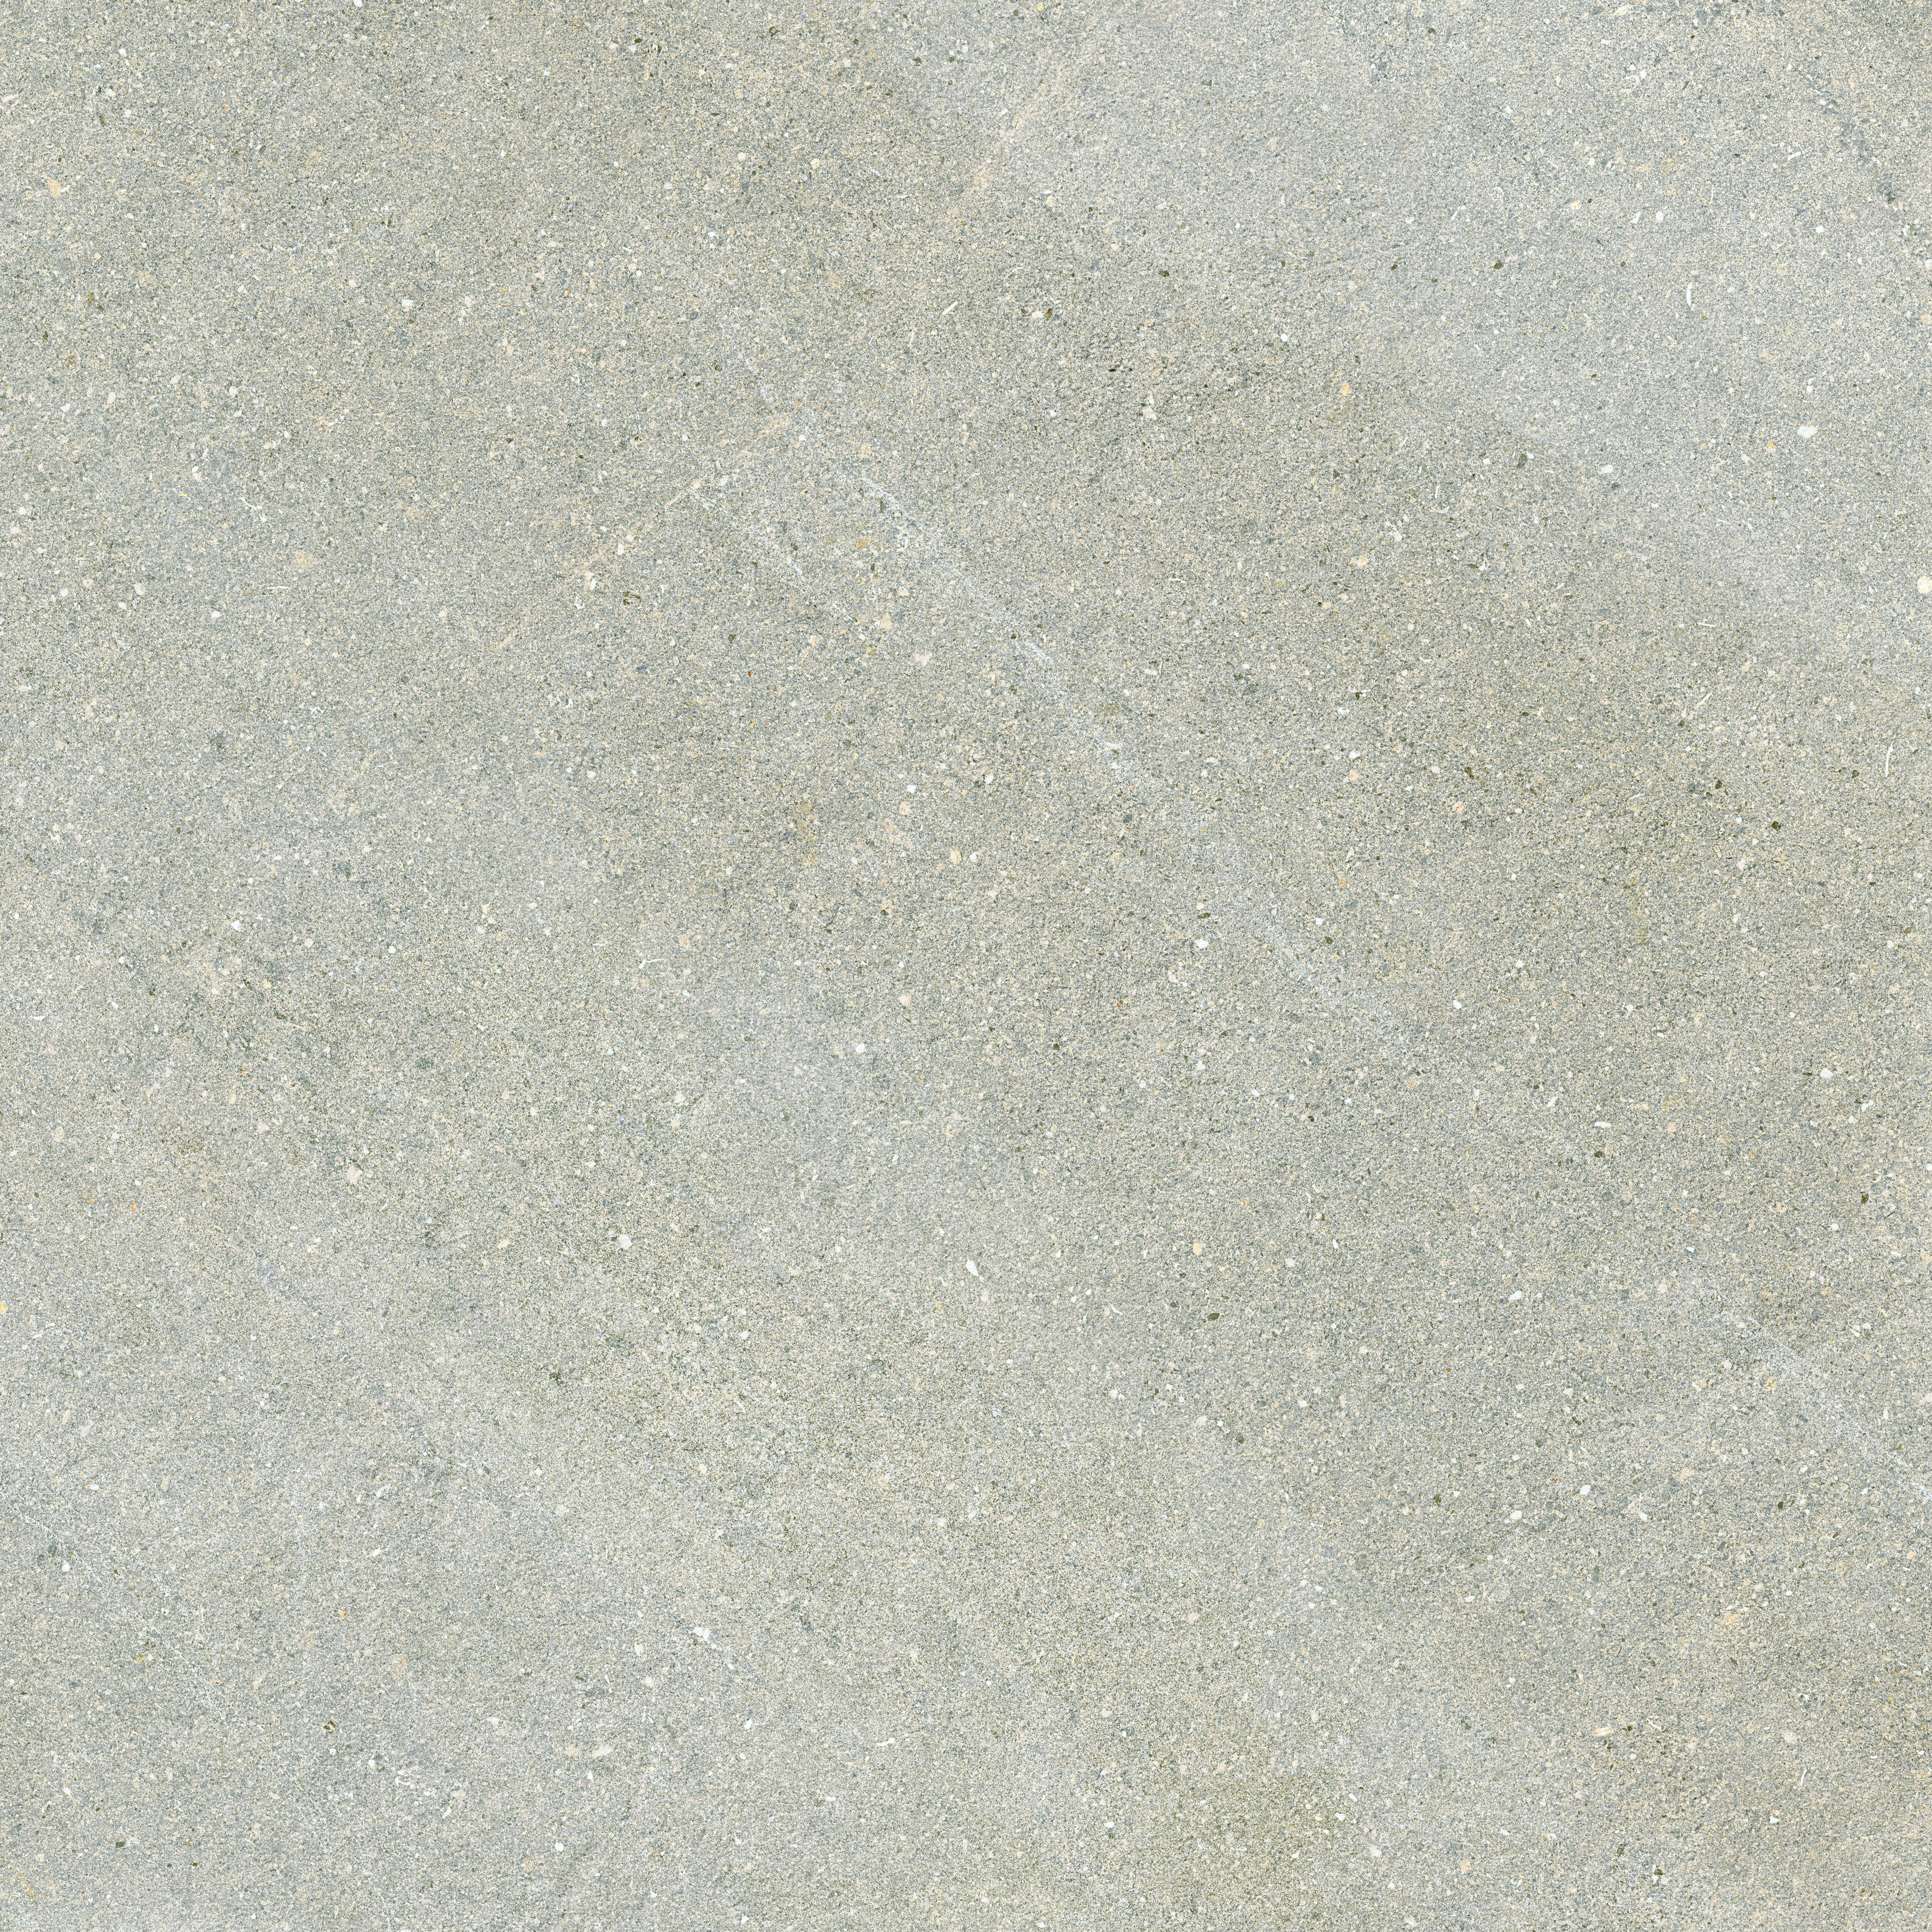 Serenissima Eclettica Argento Naturale 1081687 60x60cm rectified 9,5mm